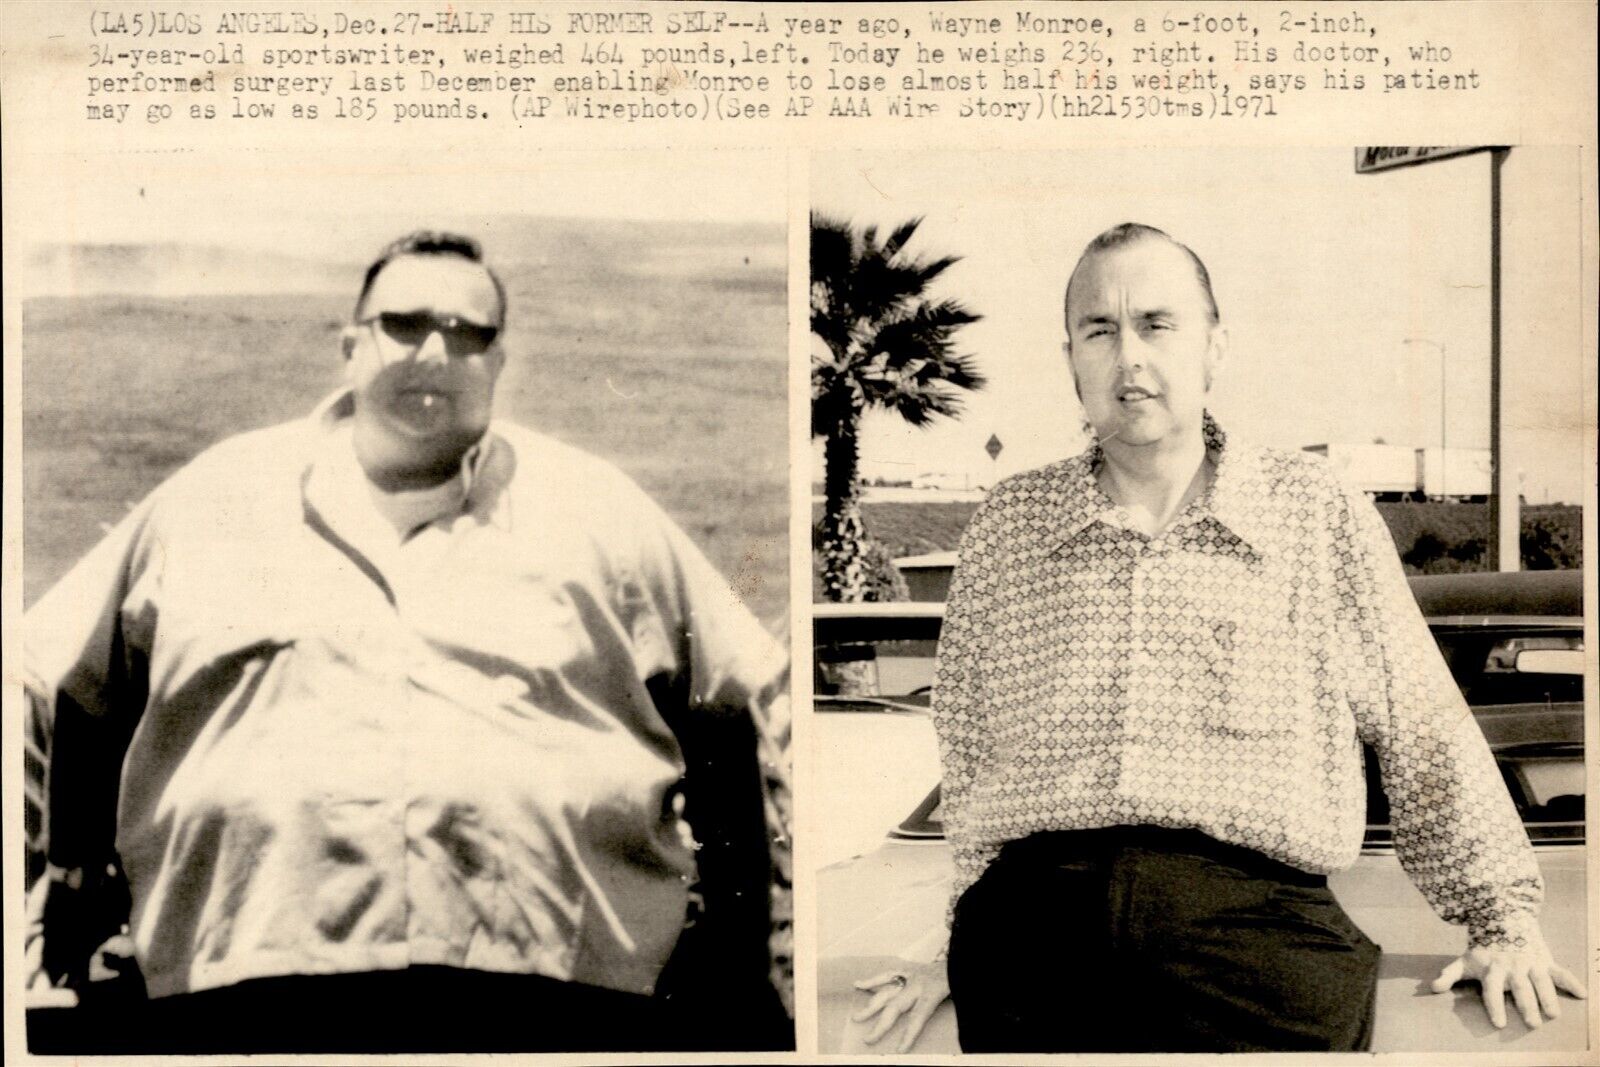 LG27 1971 AP Wire Photo OVERWEIGHT MAN HALF HIS FORMER SELF OBESITY FAT AMERICAN